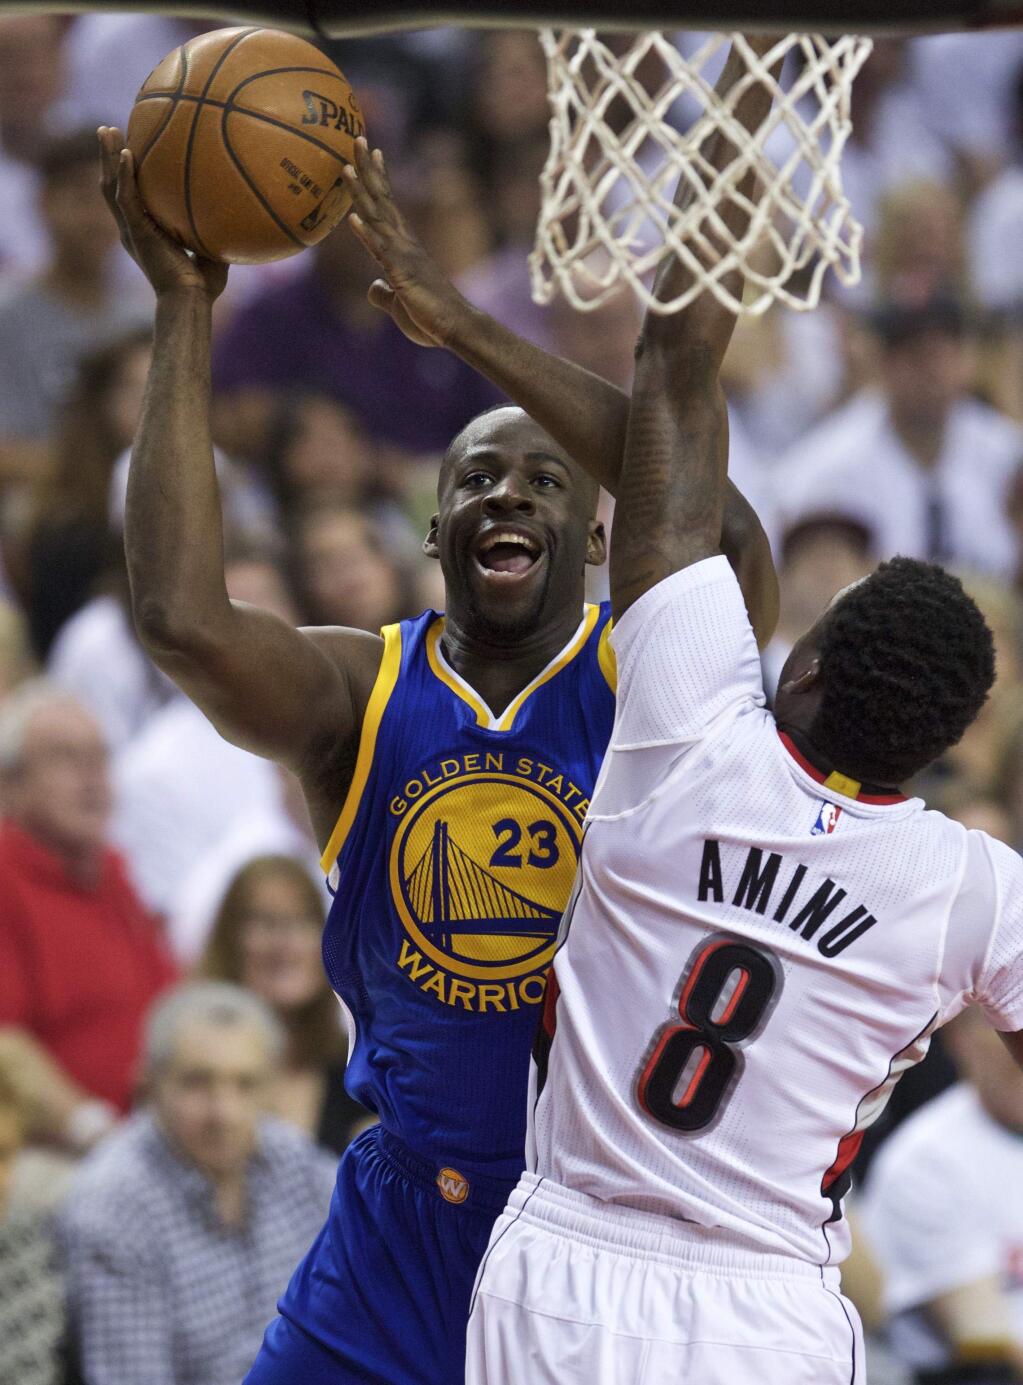 Golden State Warriors forward Draymond Green, left, shoots over Portland Trail Blazers forward Al-Farouq Aminu, right, during the first half of Game 3 of an NBA basketball second-round playoff series Saturday, May 7, 2016, in Portland, Ore. (AP Photo/Craig Mitchelldyer)